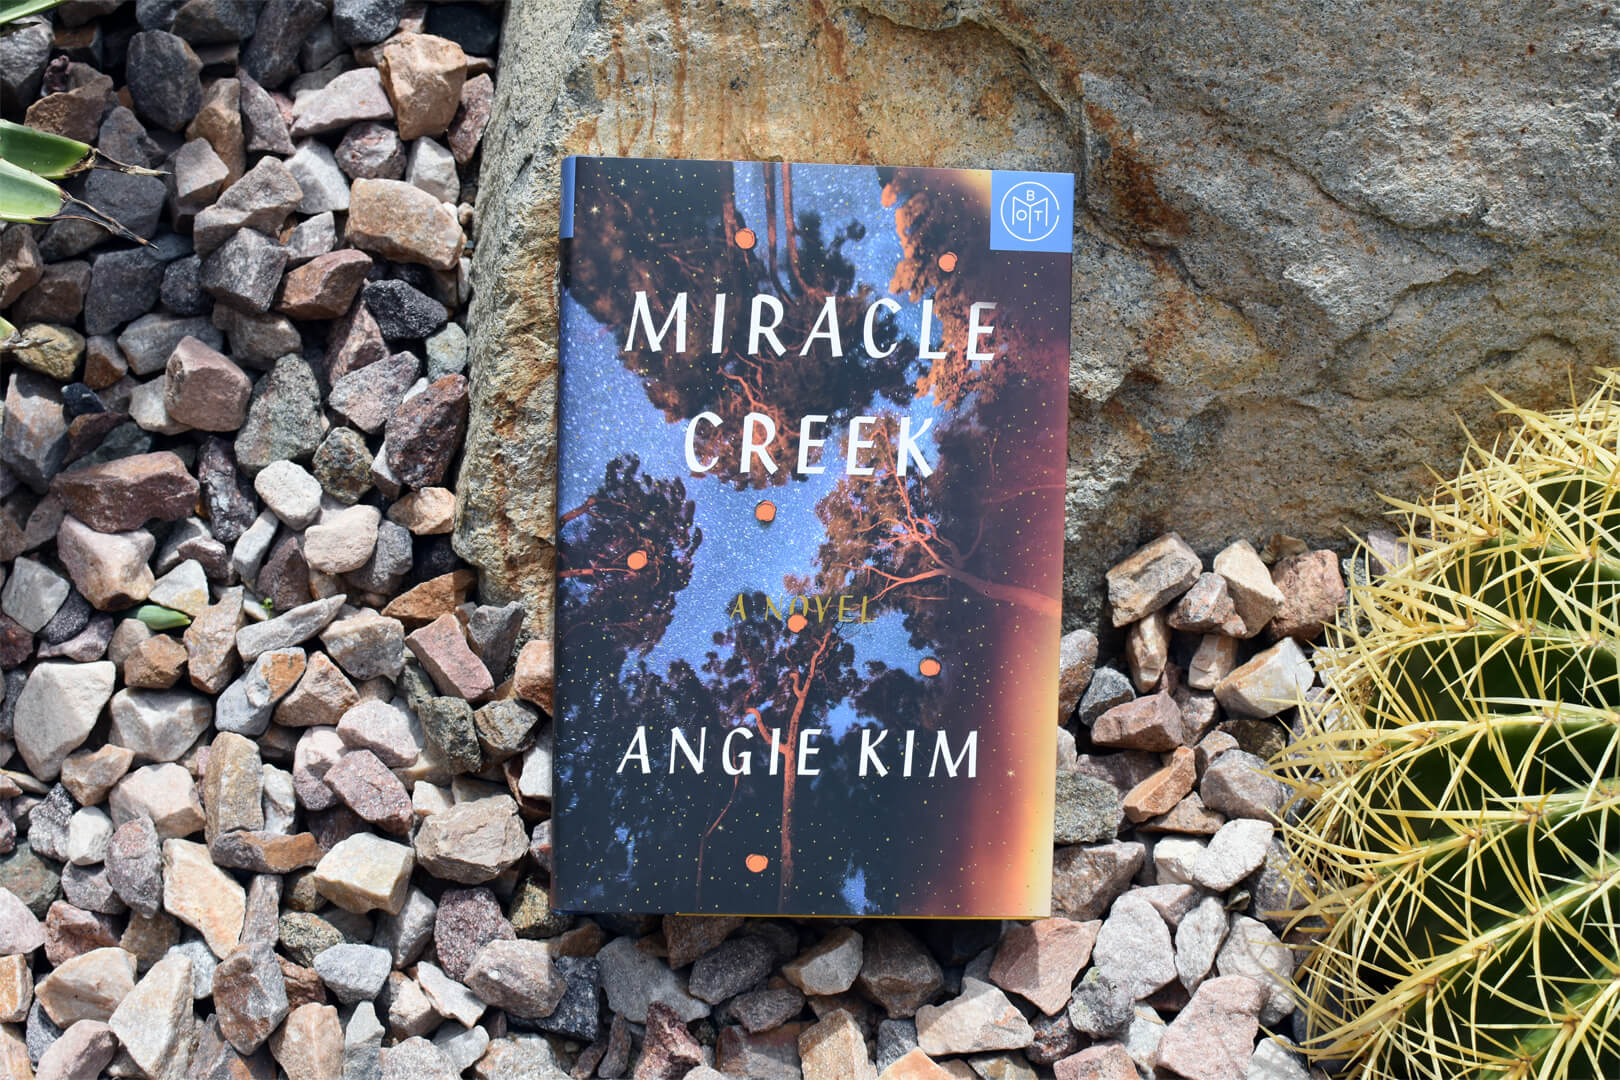 Review: Miracle Creek by Angie Kim